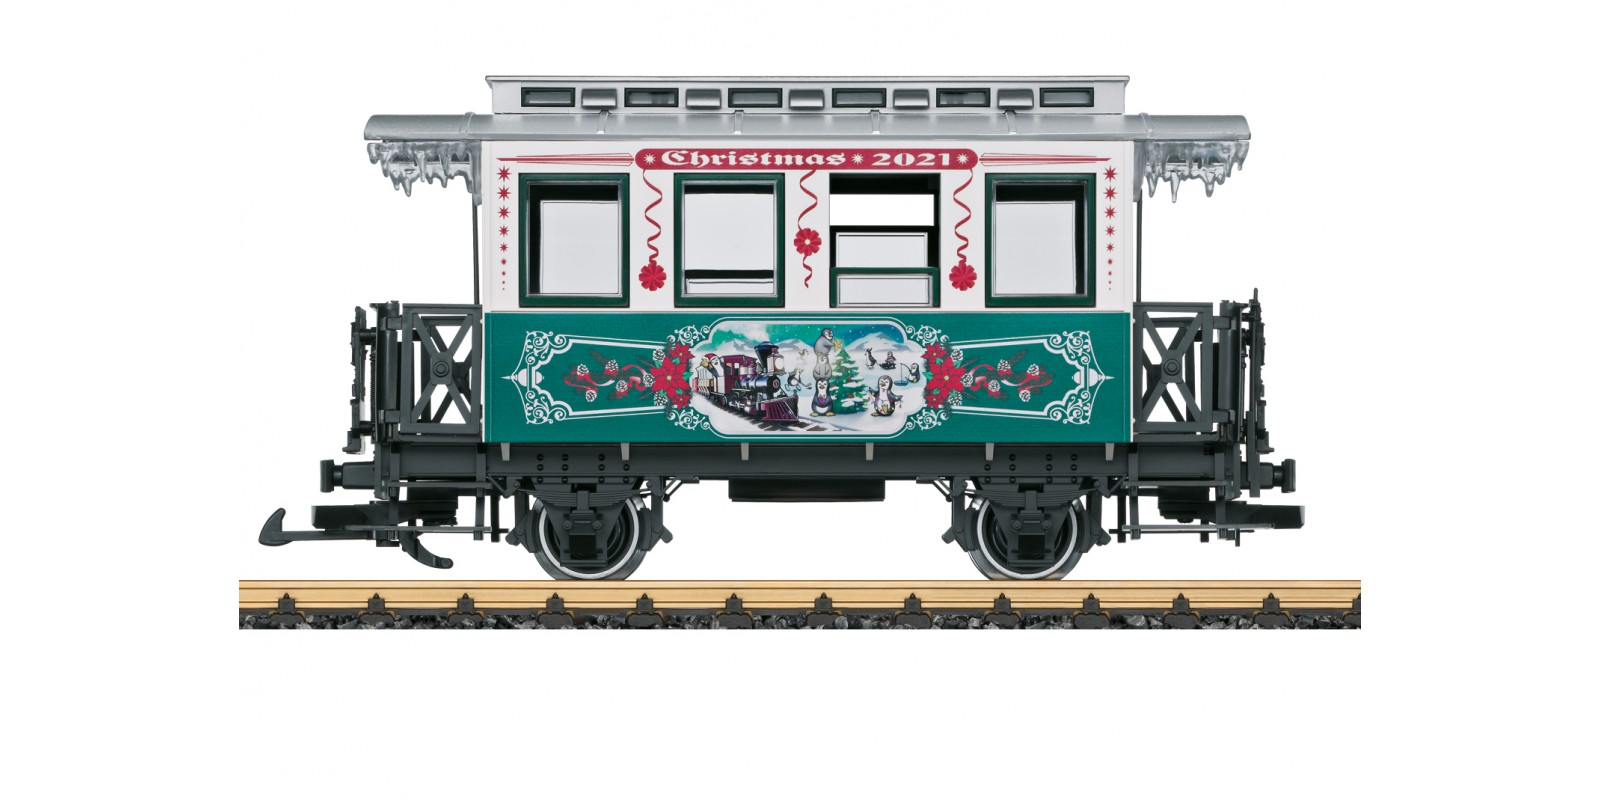 L36021 Christmas Car for 2021